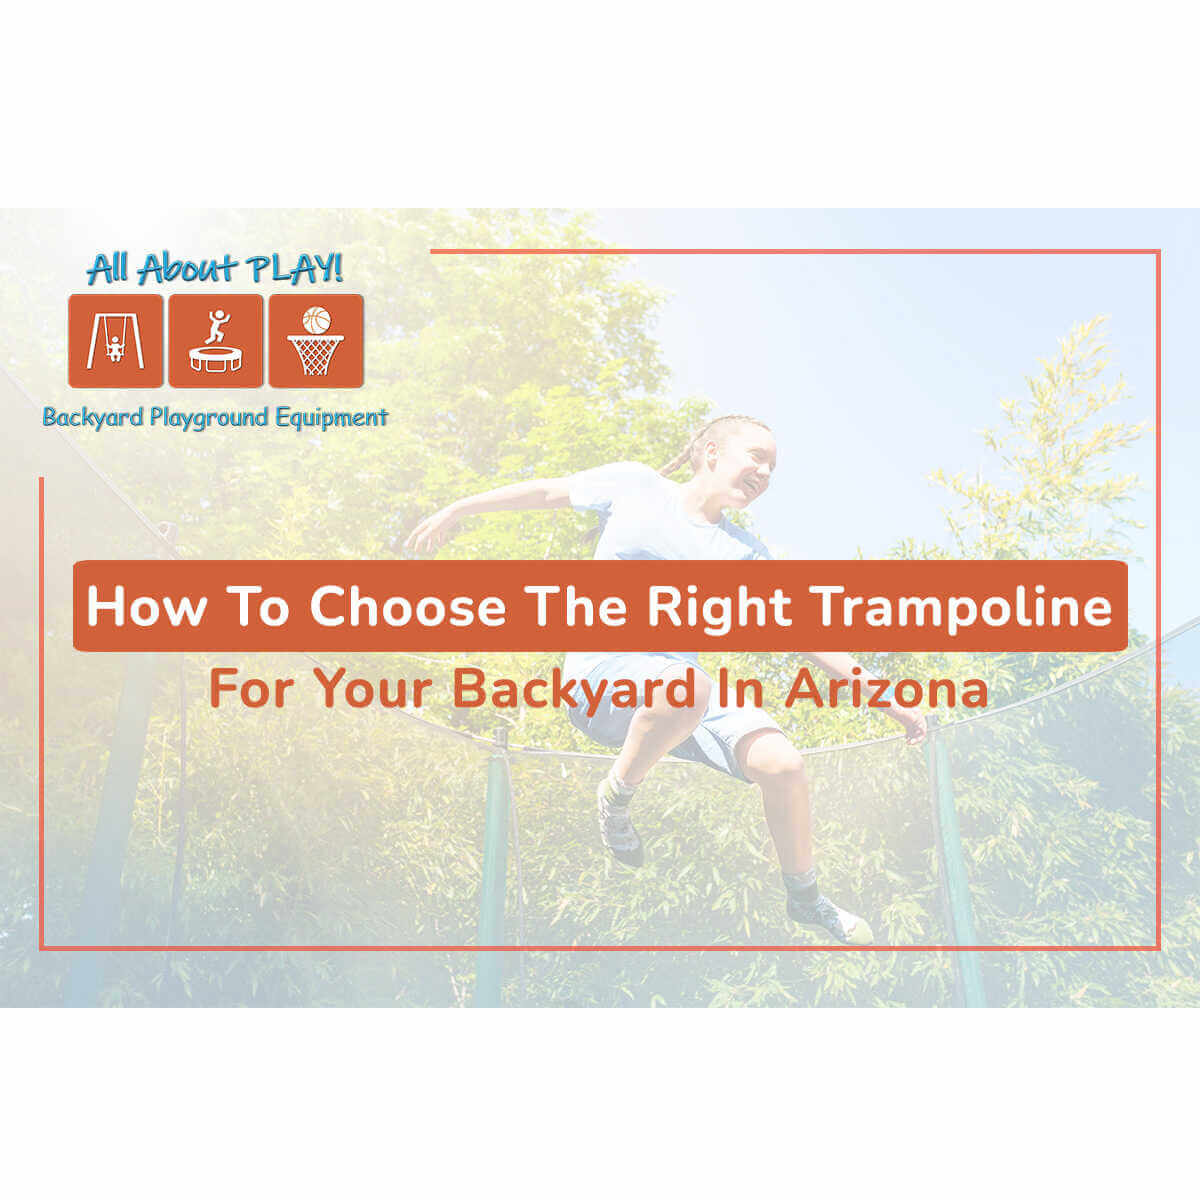 How To Choose The Right Trampoline For Your Backyard In Arizona